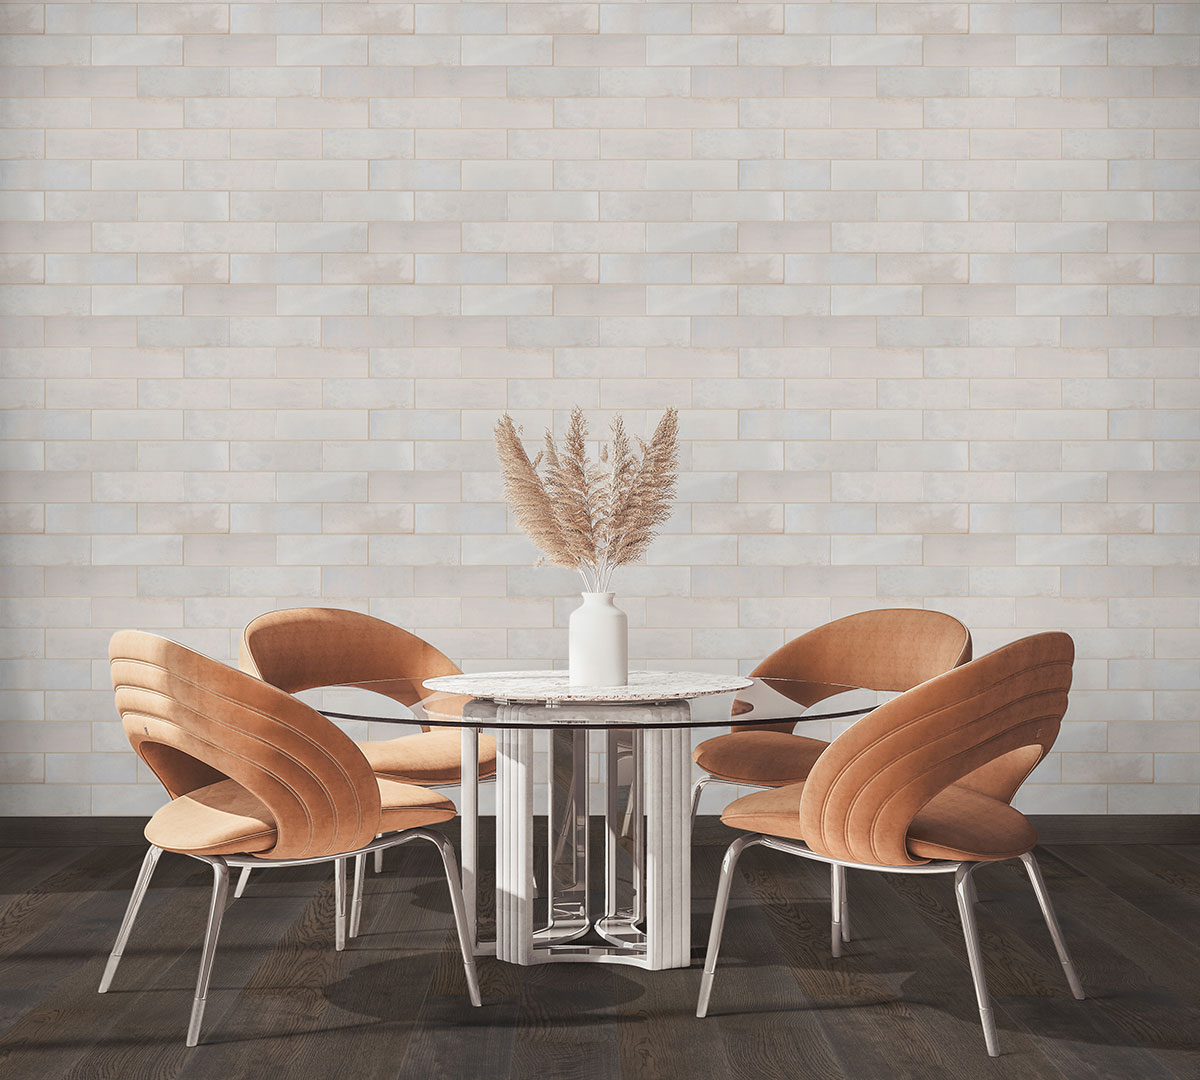 Marza Pearl Subway Tile wall in dining room